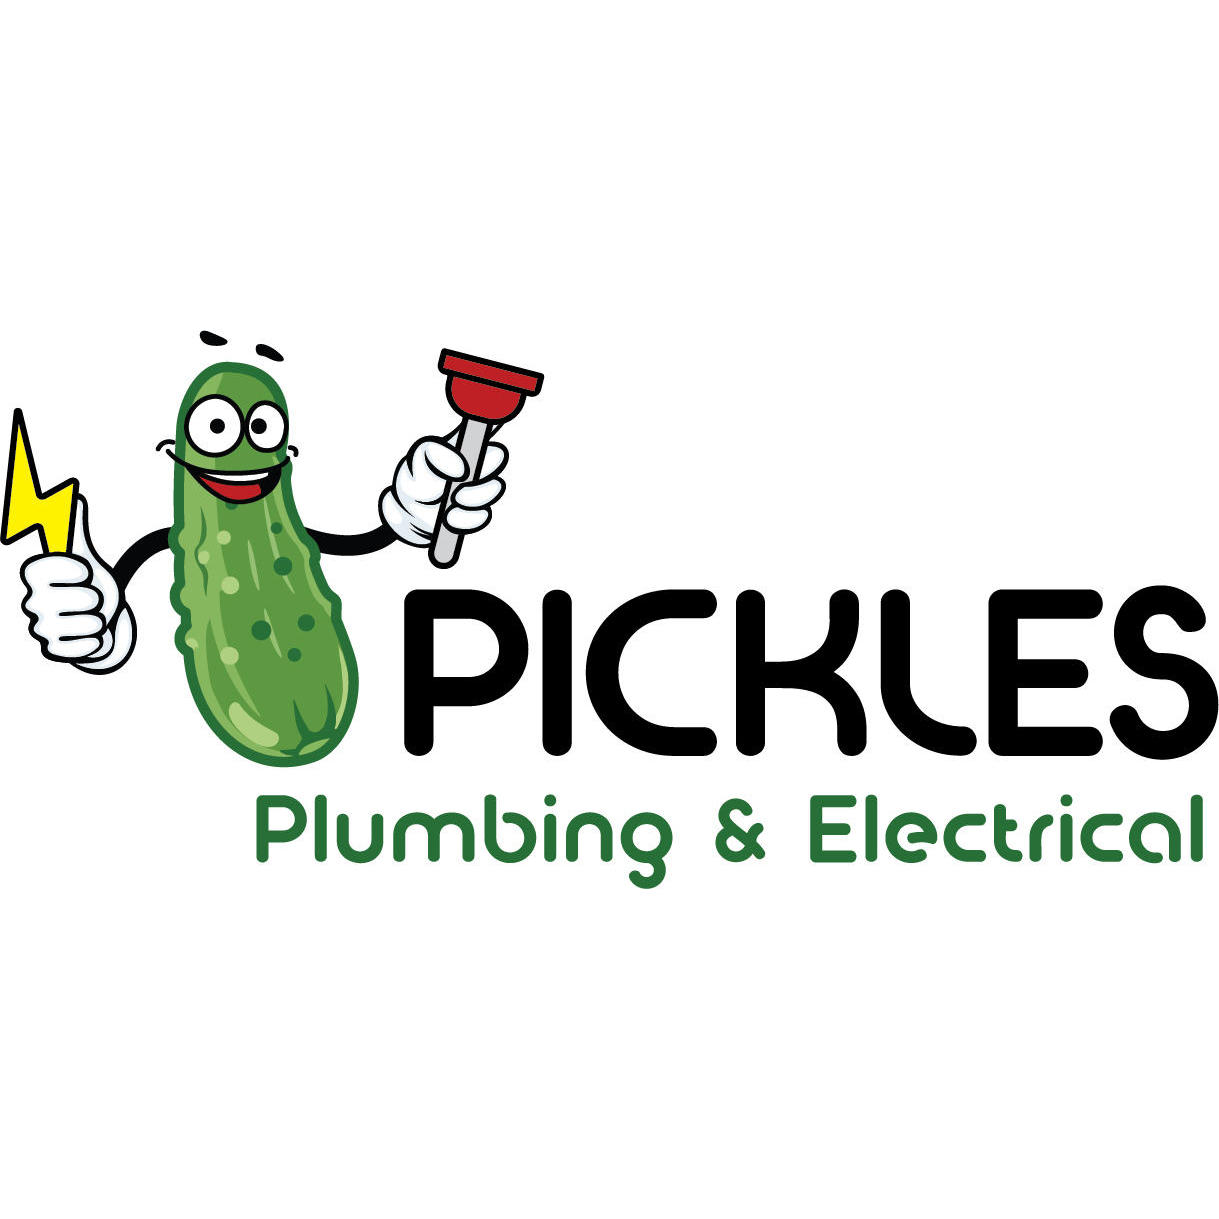 PICKLES PLUMBING AND ELECTRICAL PTY LTD - Tanilba Bay, NSW - 0419 372 131 | ShowMeLocal.com